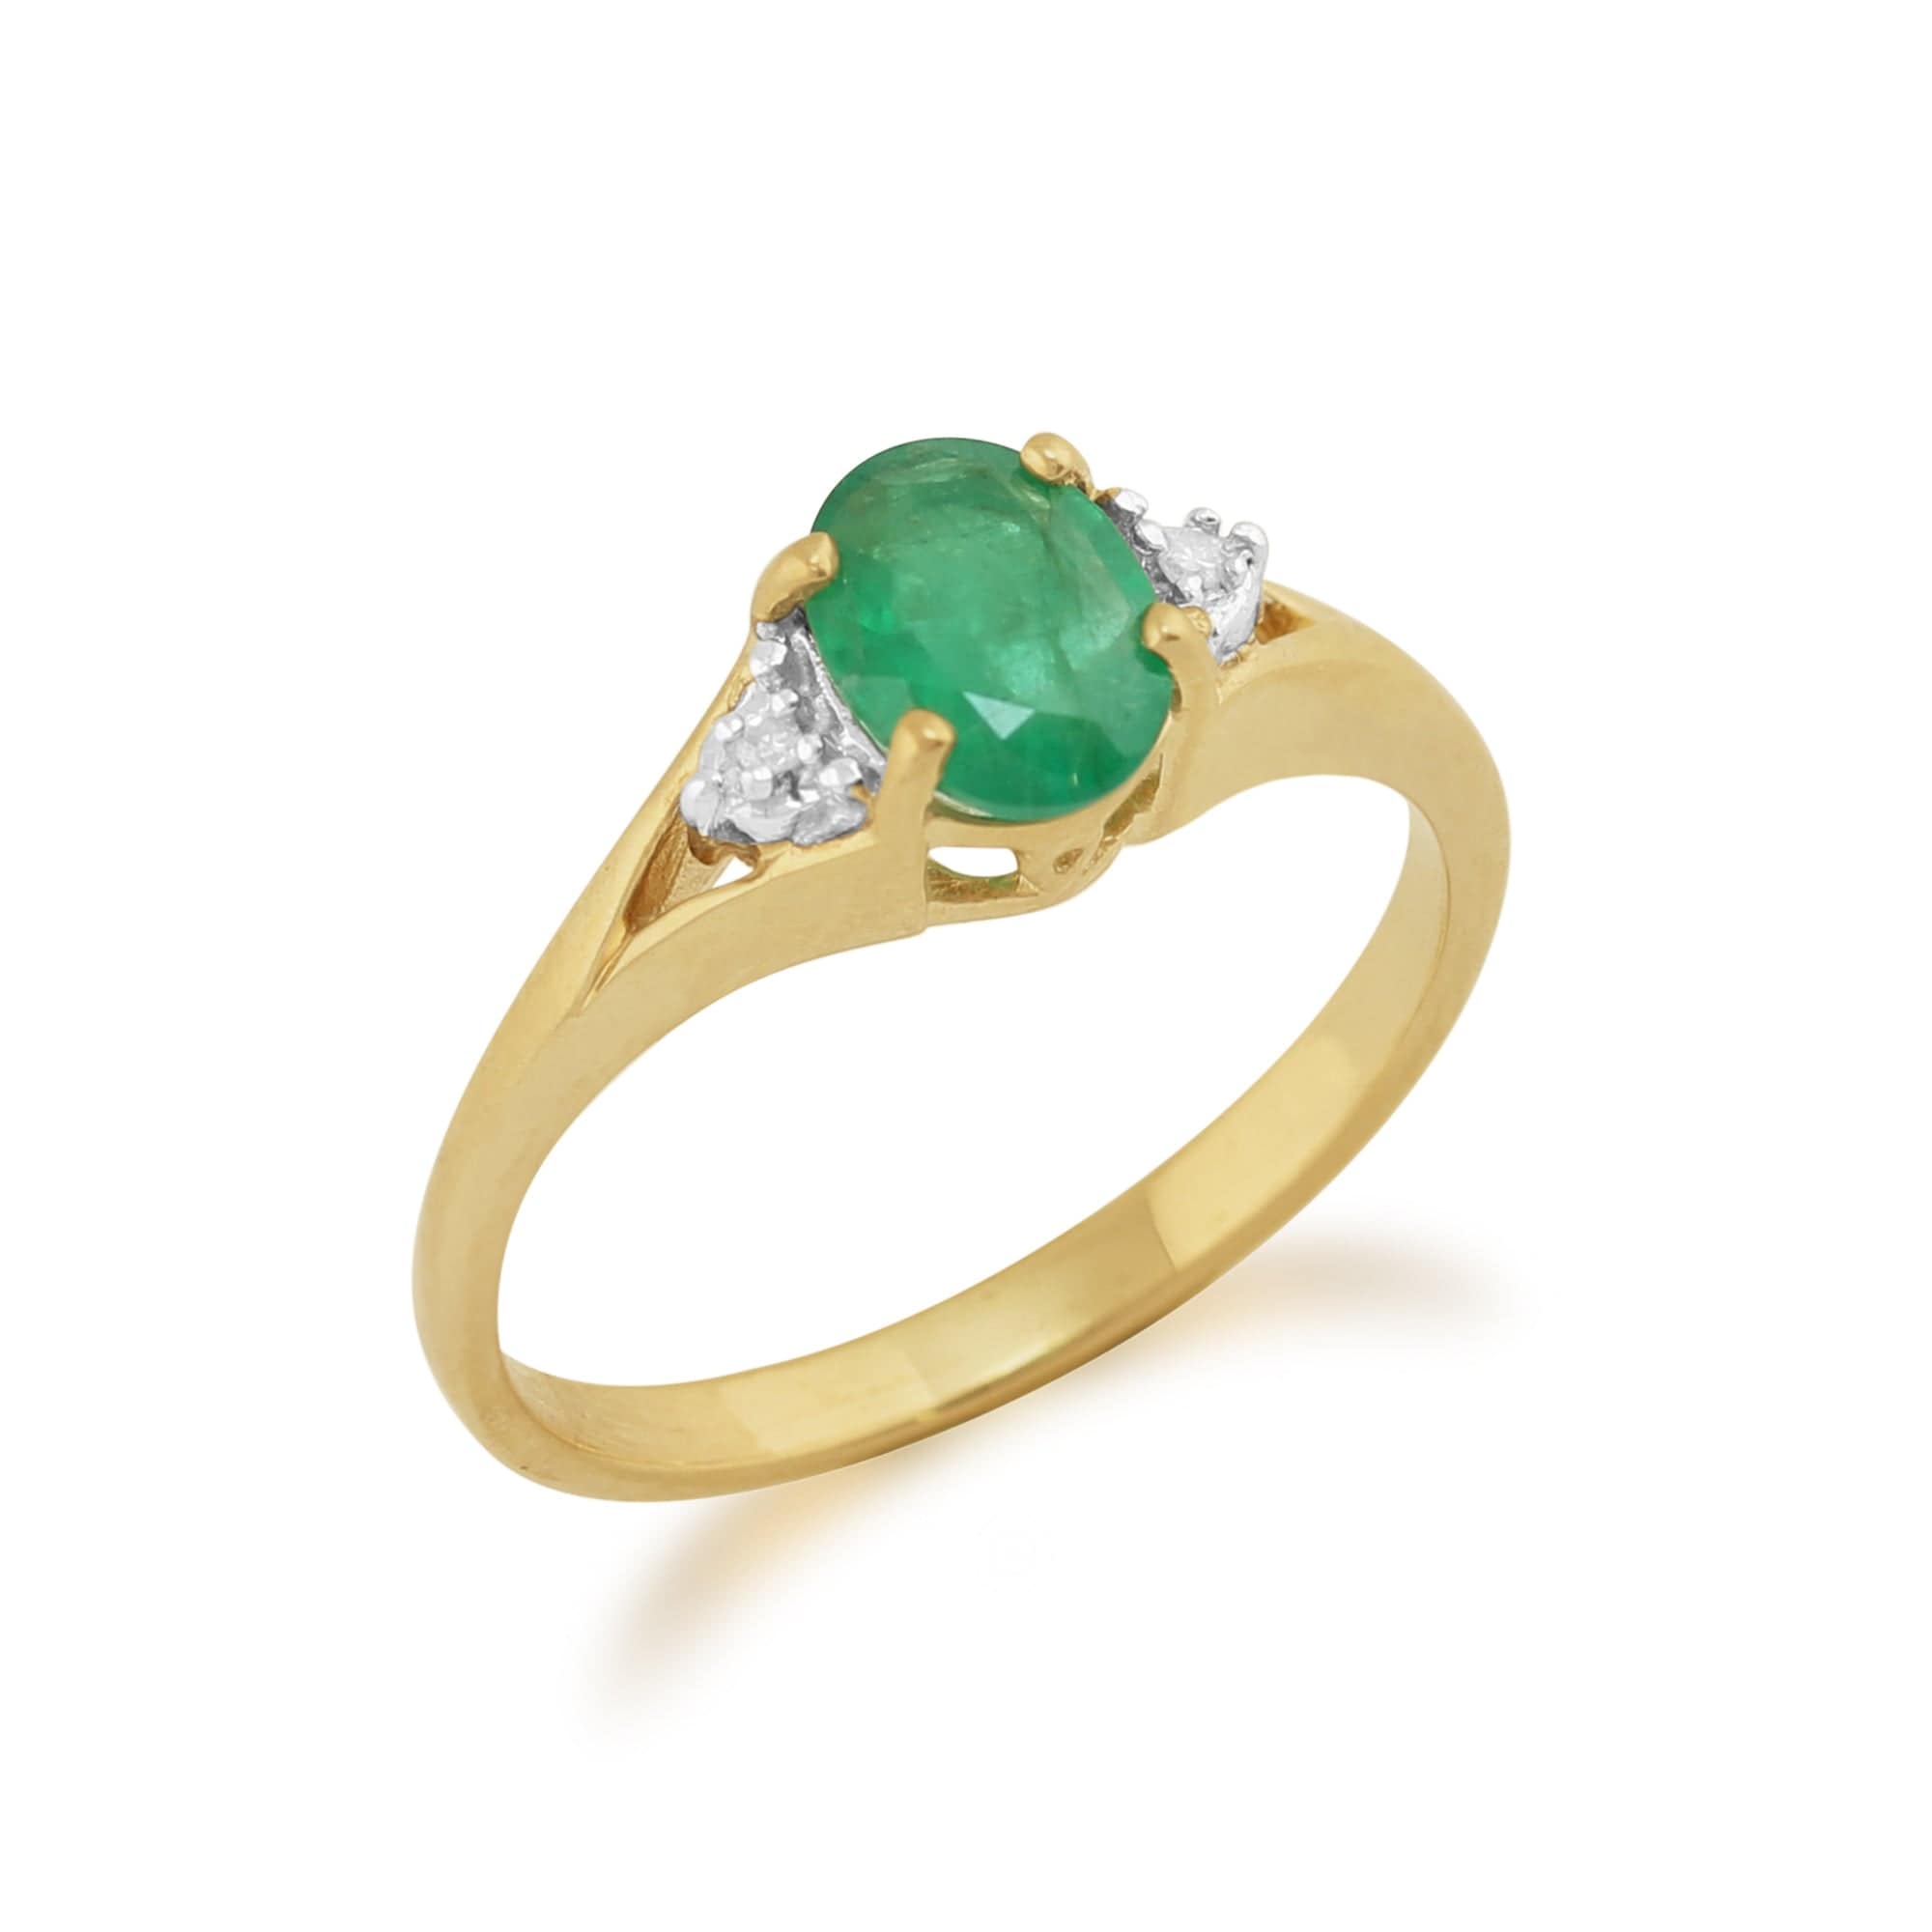 26998 Classic Oval Emerald & Diamond Ring in 9ct Yellow Gold 2